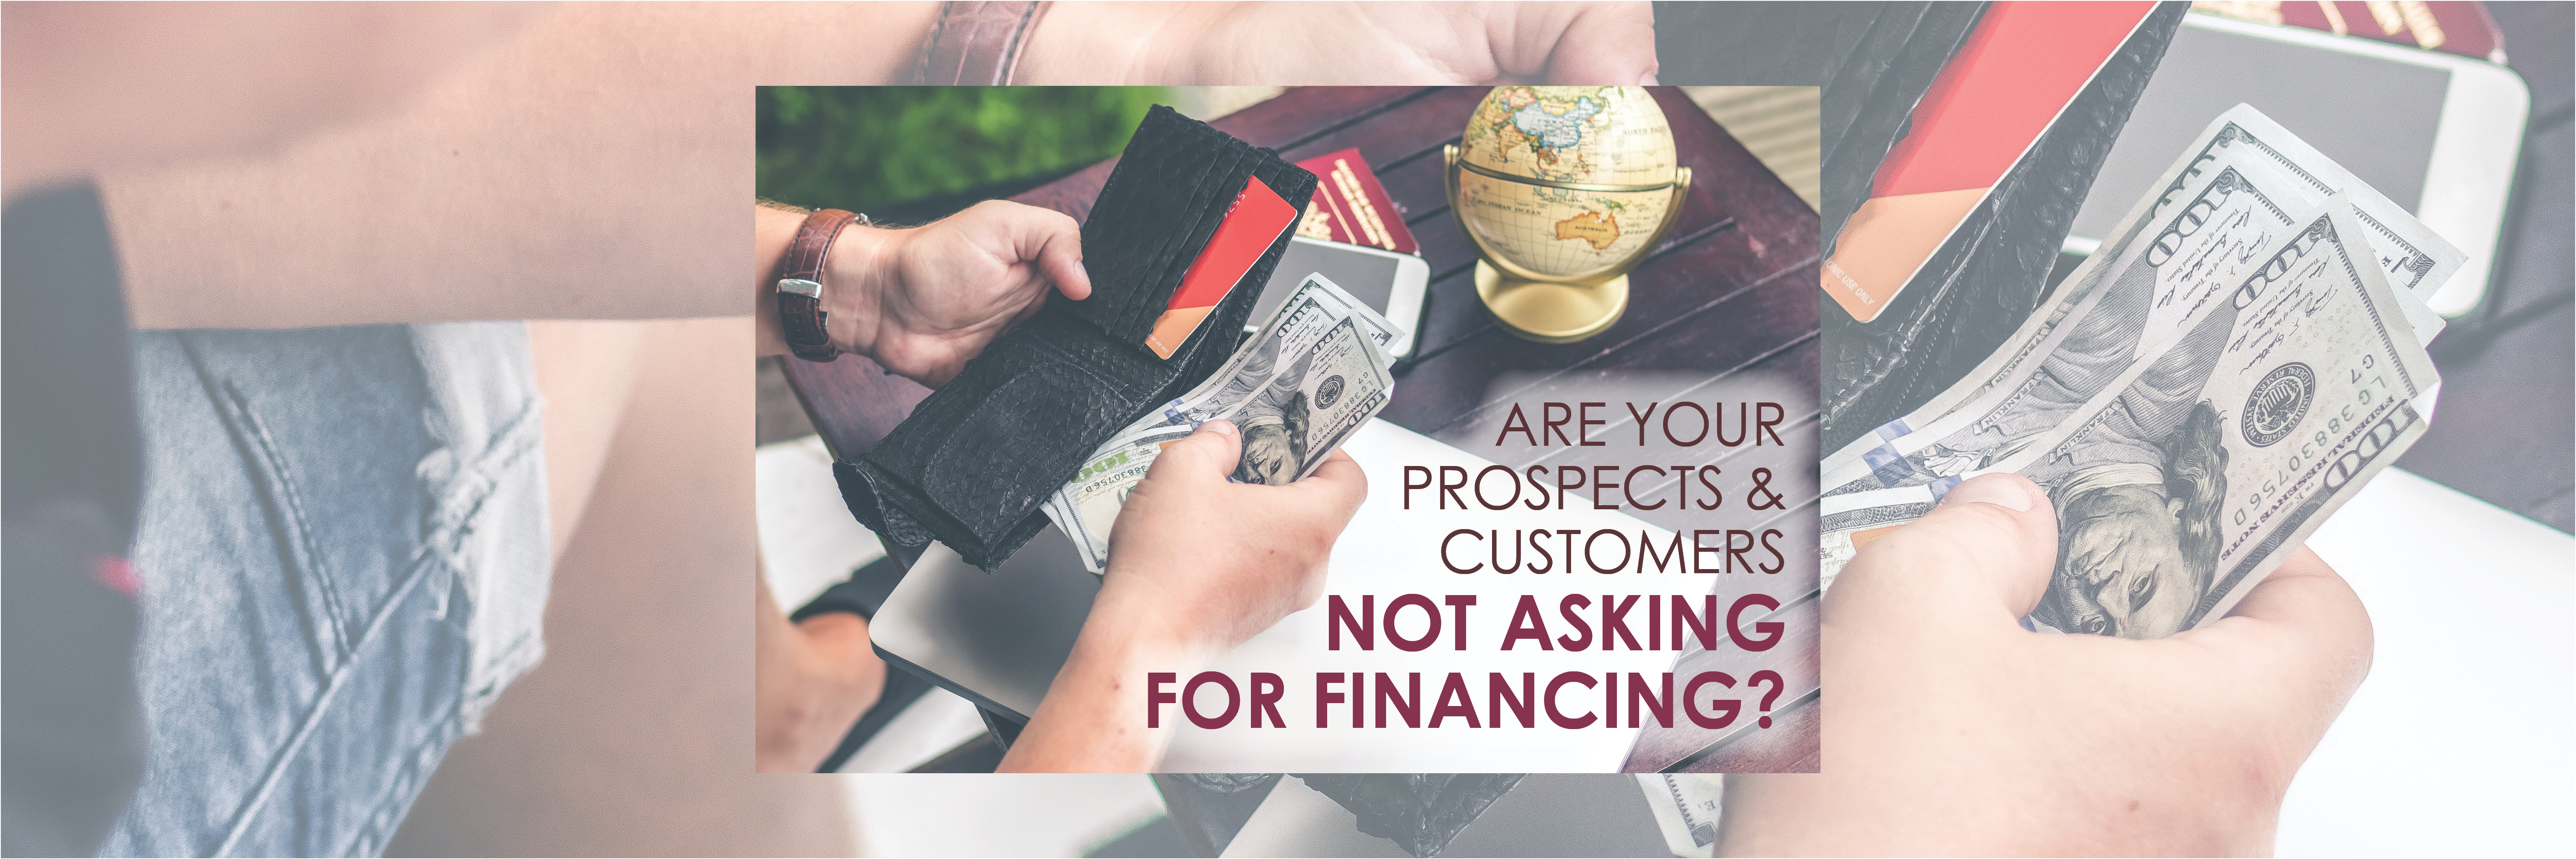 Are Your Prospects and Customers Not Asking for Financing?